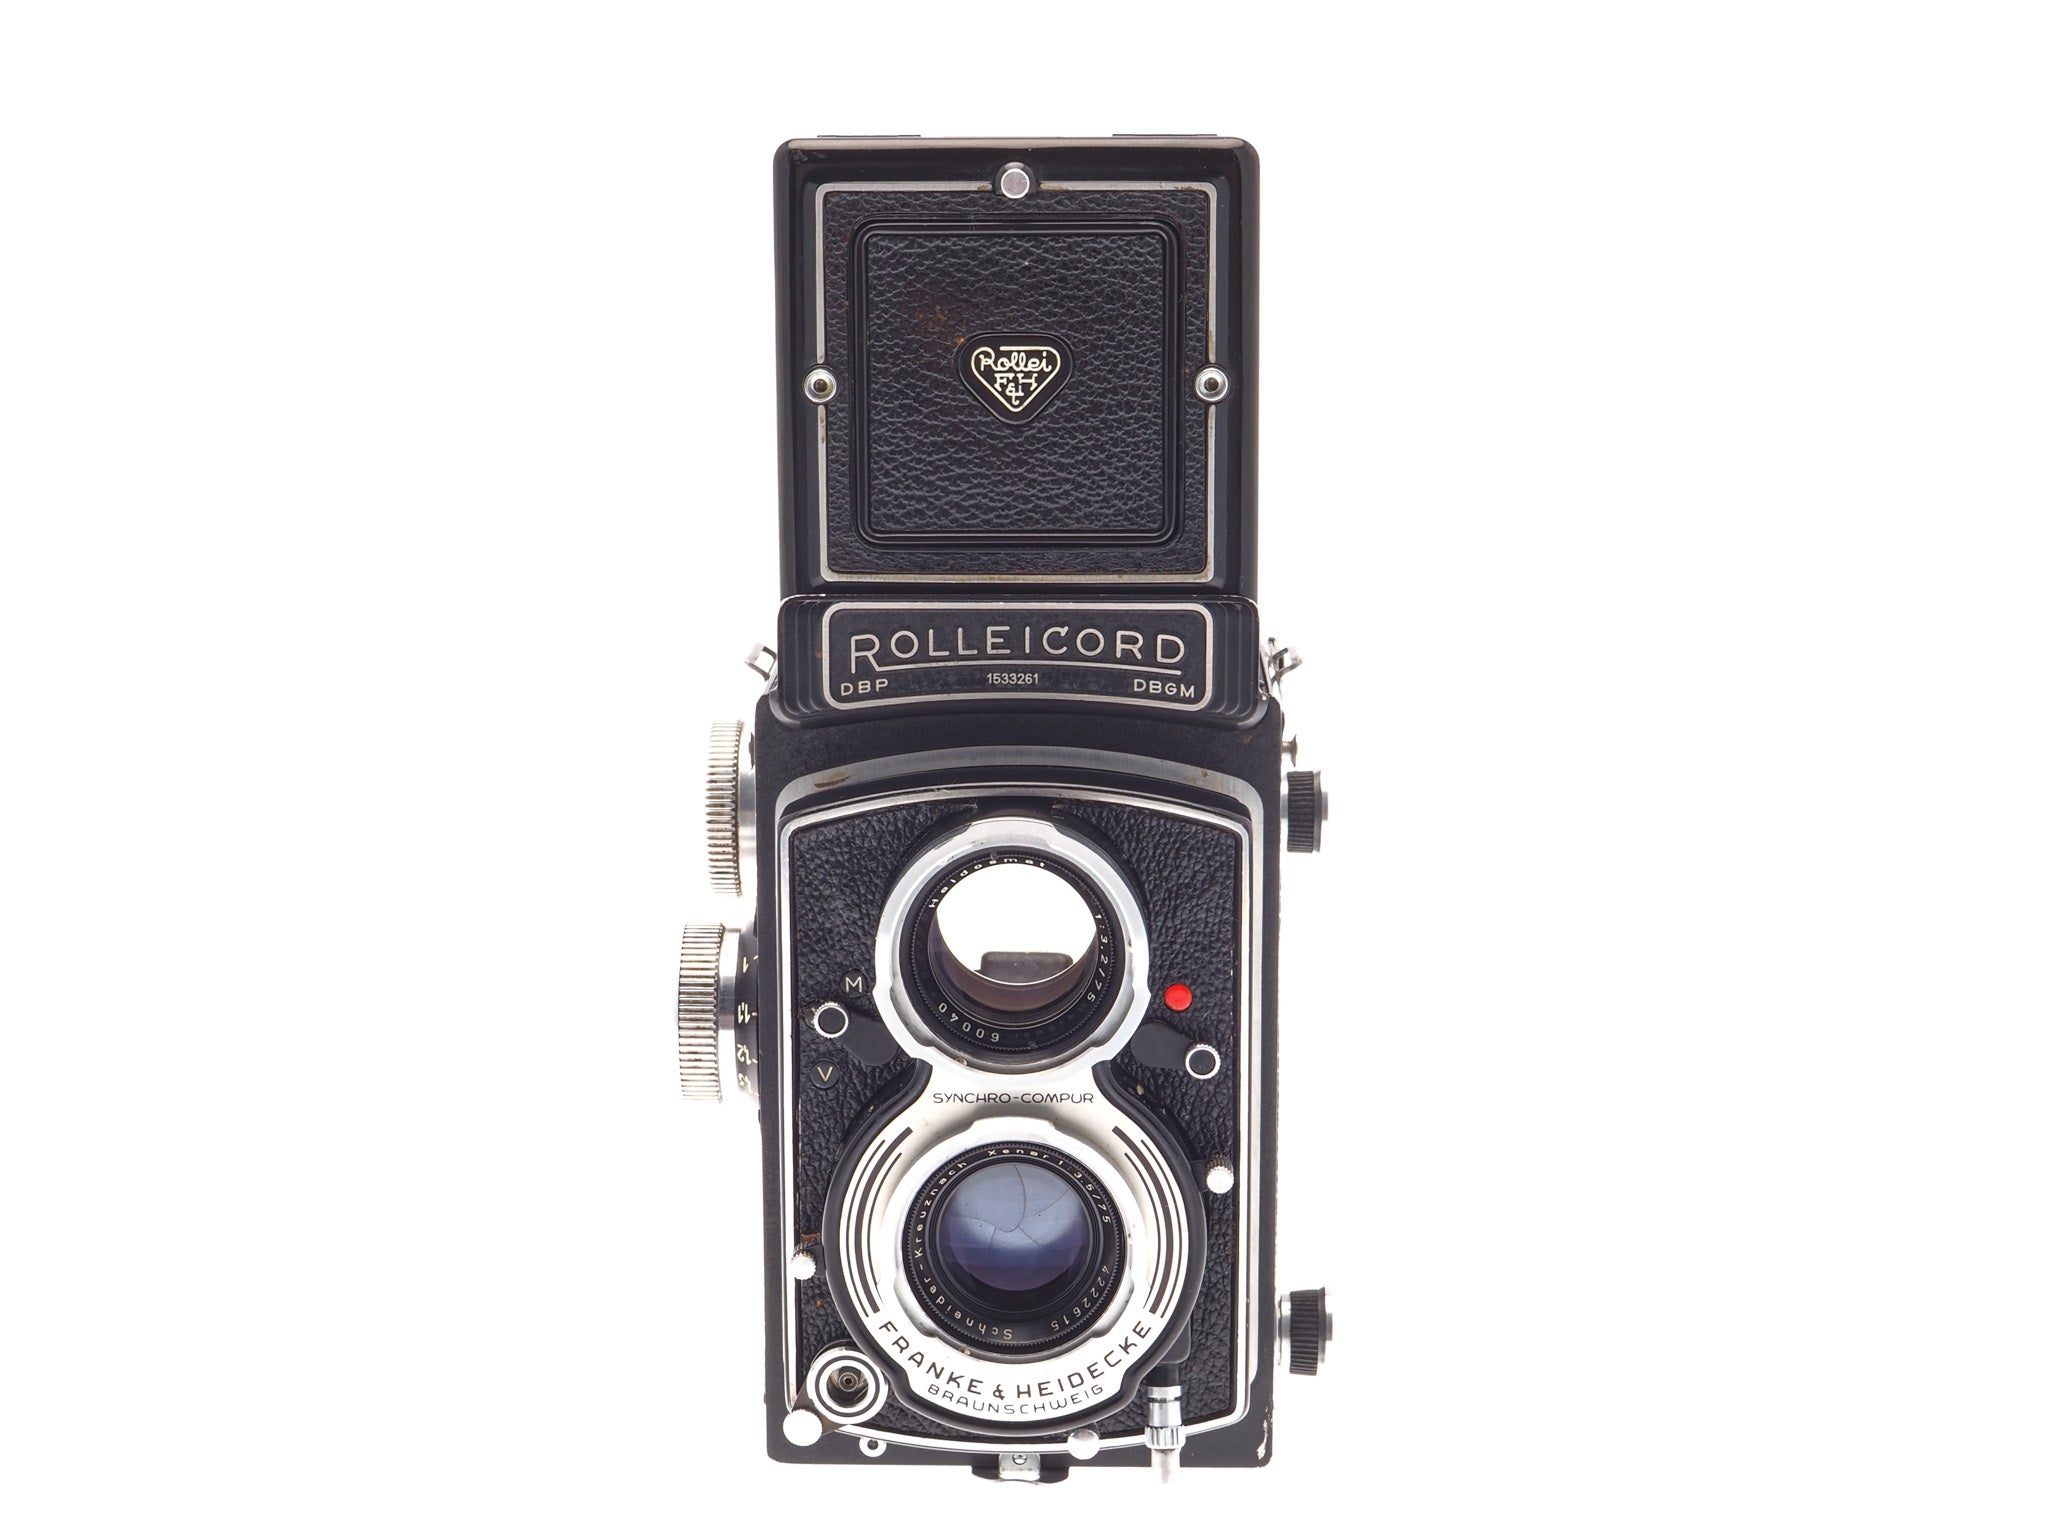 Rollei Rolleicord V (K3C) - 120 Film Camera - with 6 month warranty